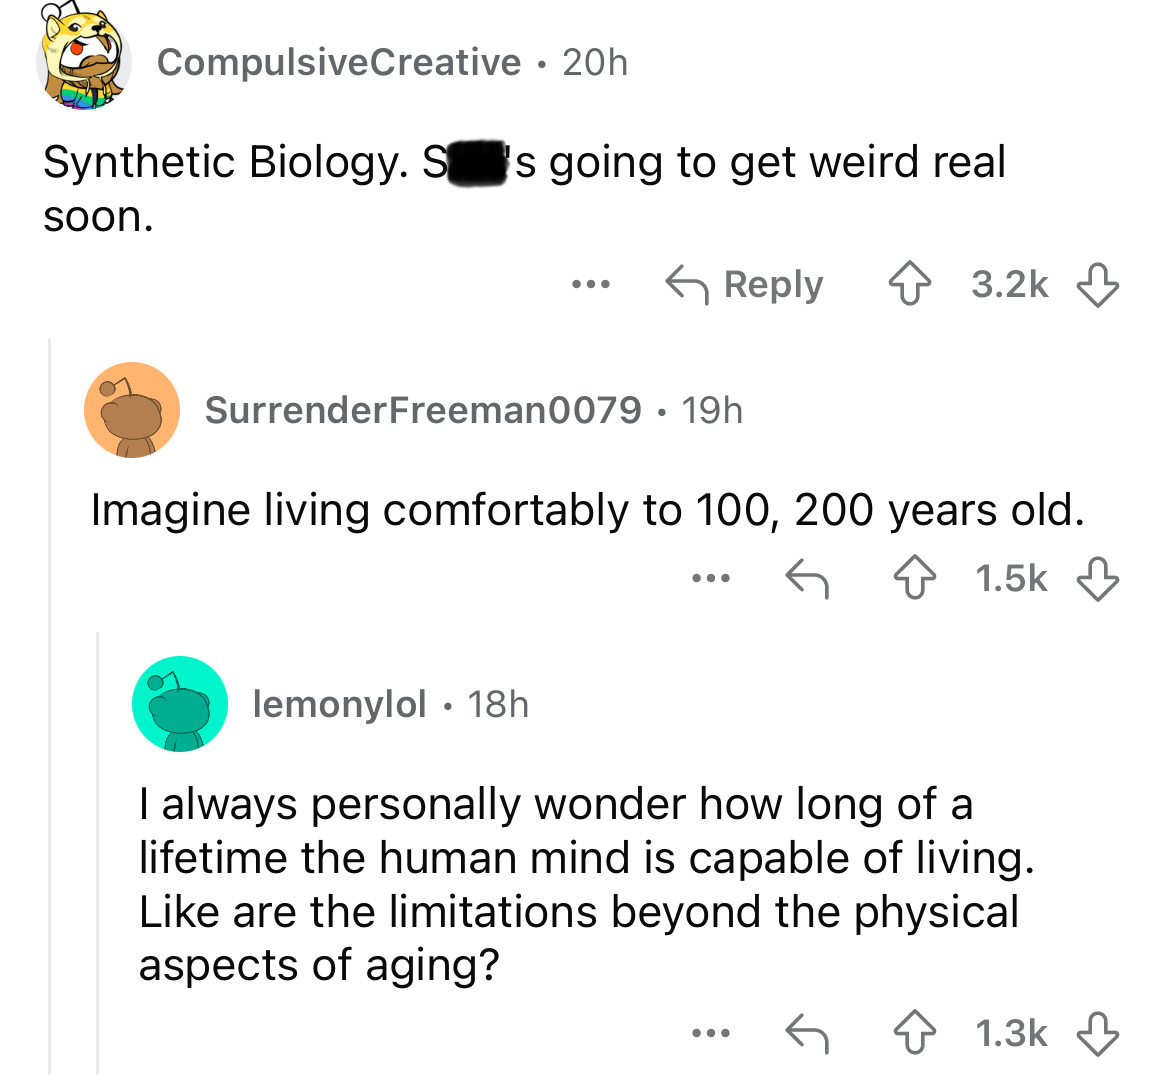 screenshot - CompulsiveCreative 20h Synthetic Biology. S's going to get weird real soon. ... SurrenderFreeman0079 19h Imagine living comfortably to 100, 200 years old. ... lemonylol 18h . I always personally wonder how long of a lifetime the human mind is